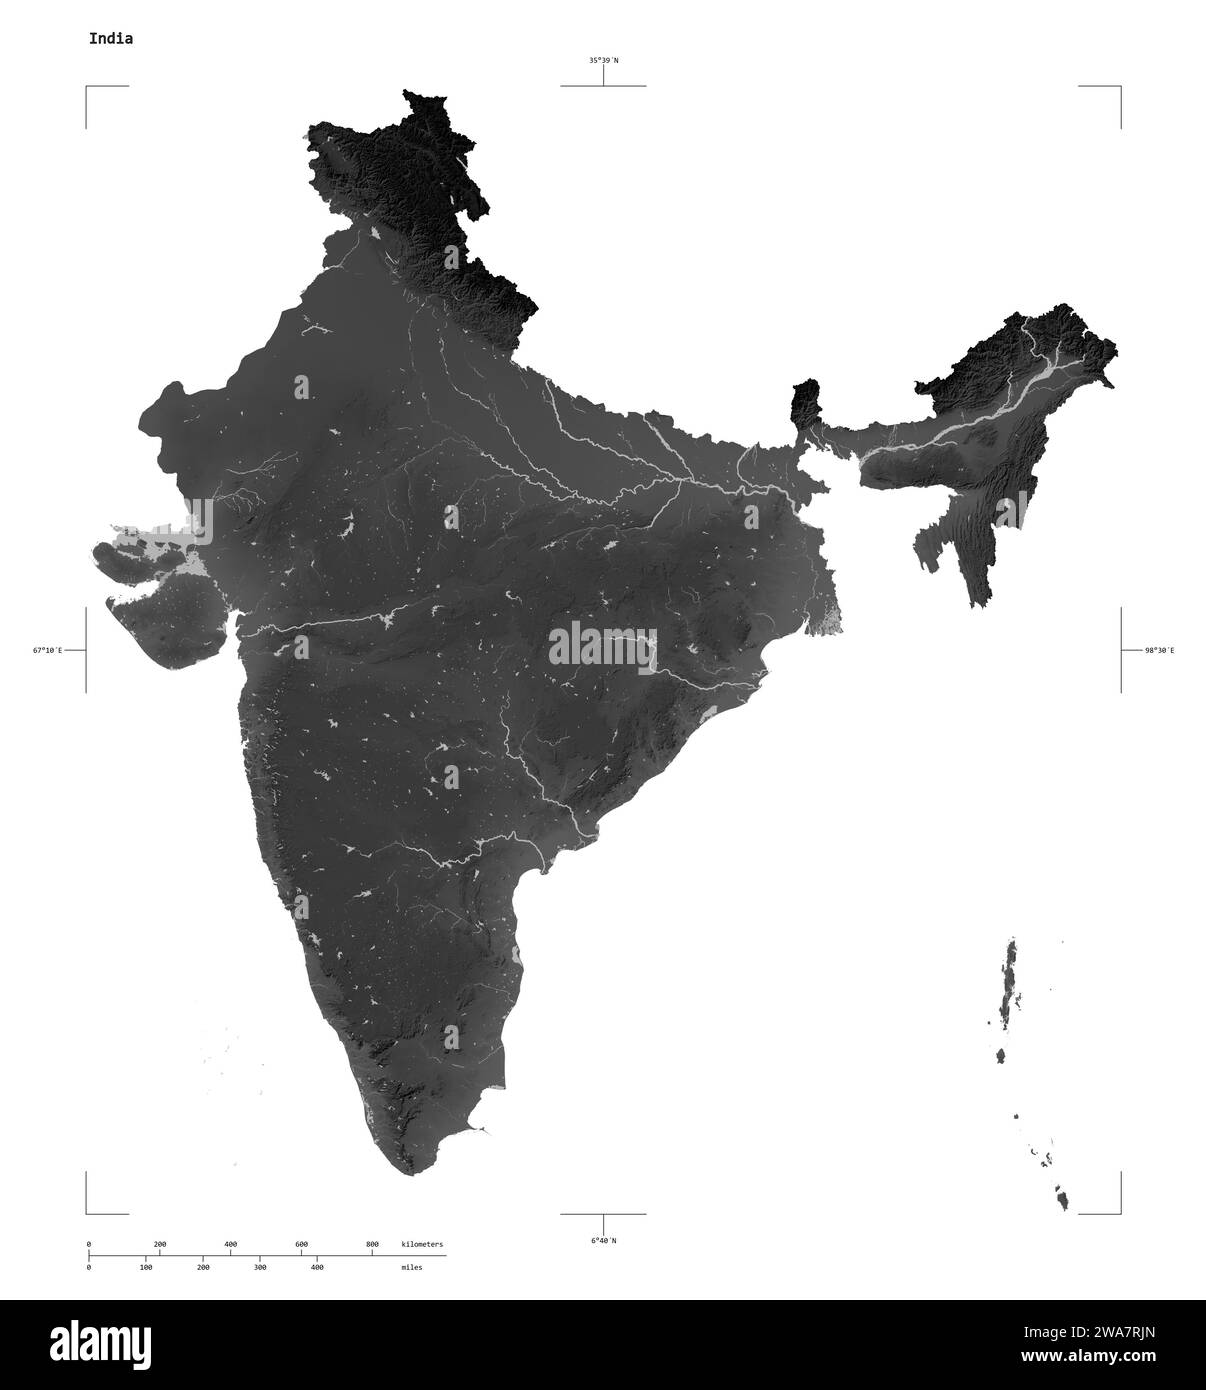 Shape of a Grayscale elevation map with lakes and rivers of the India, with distance scale and map border coordinates, isolated on white Stock Photo